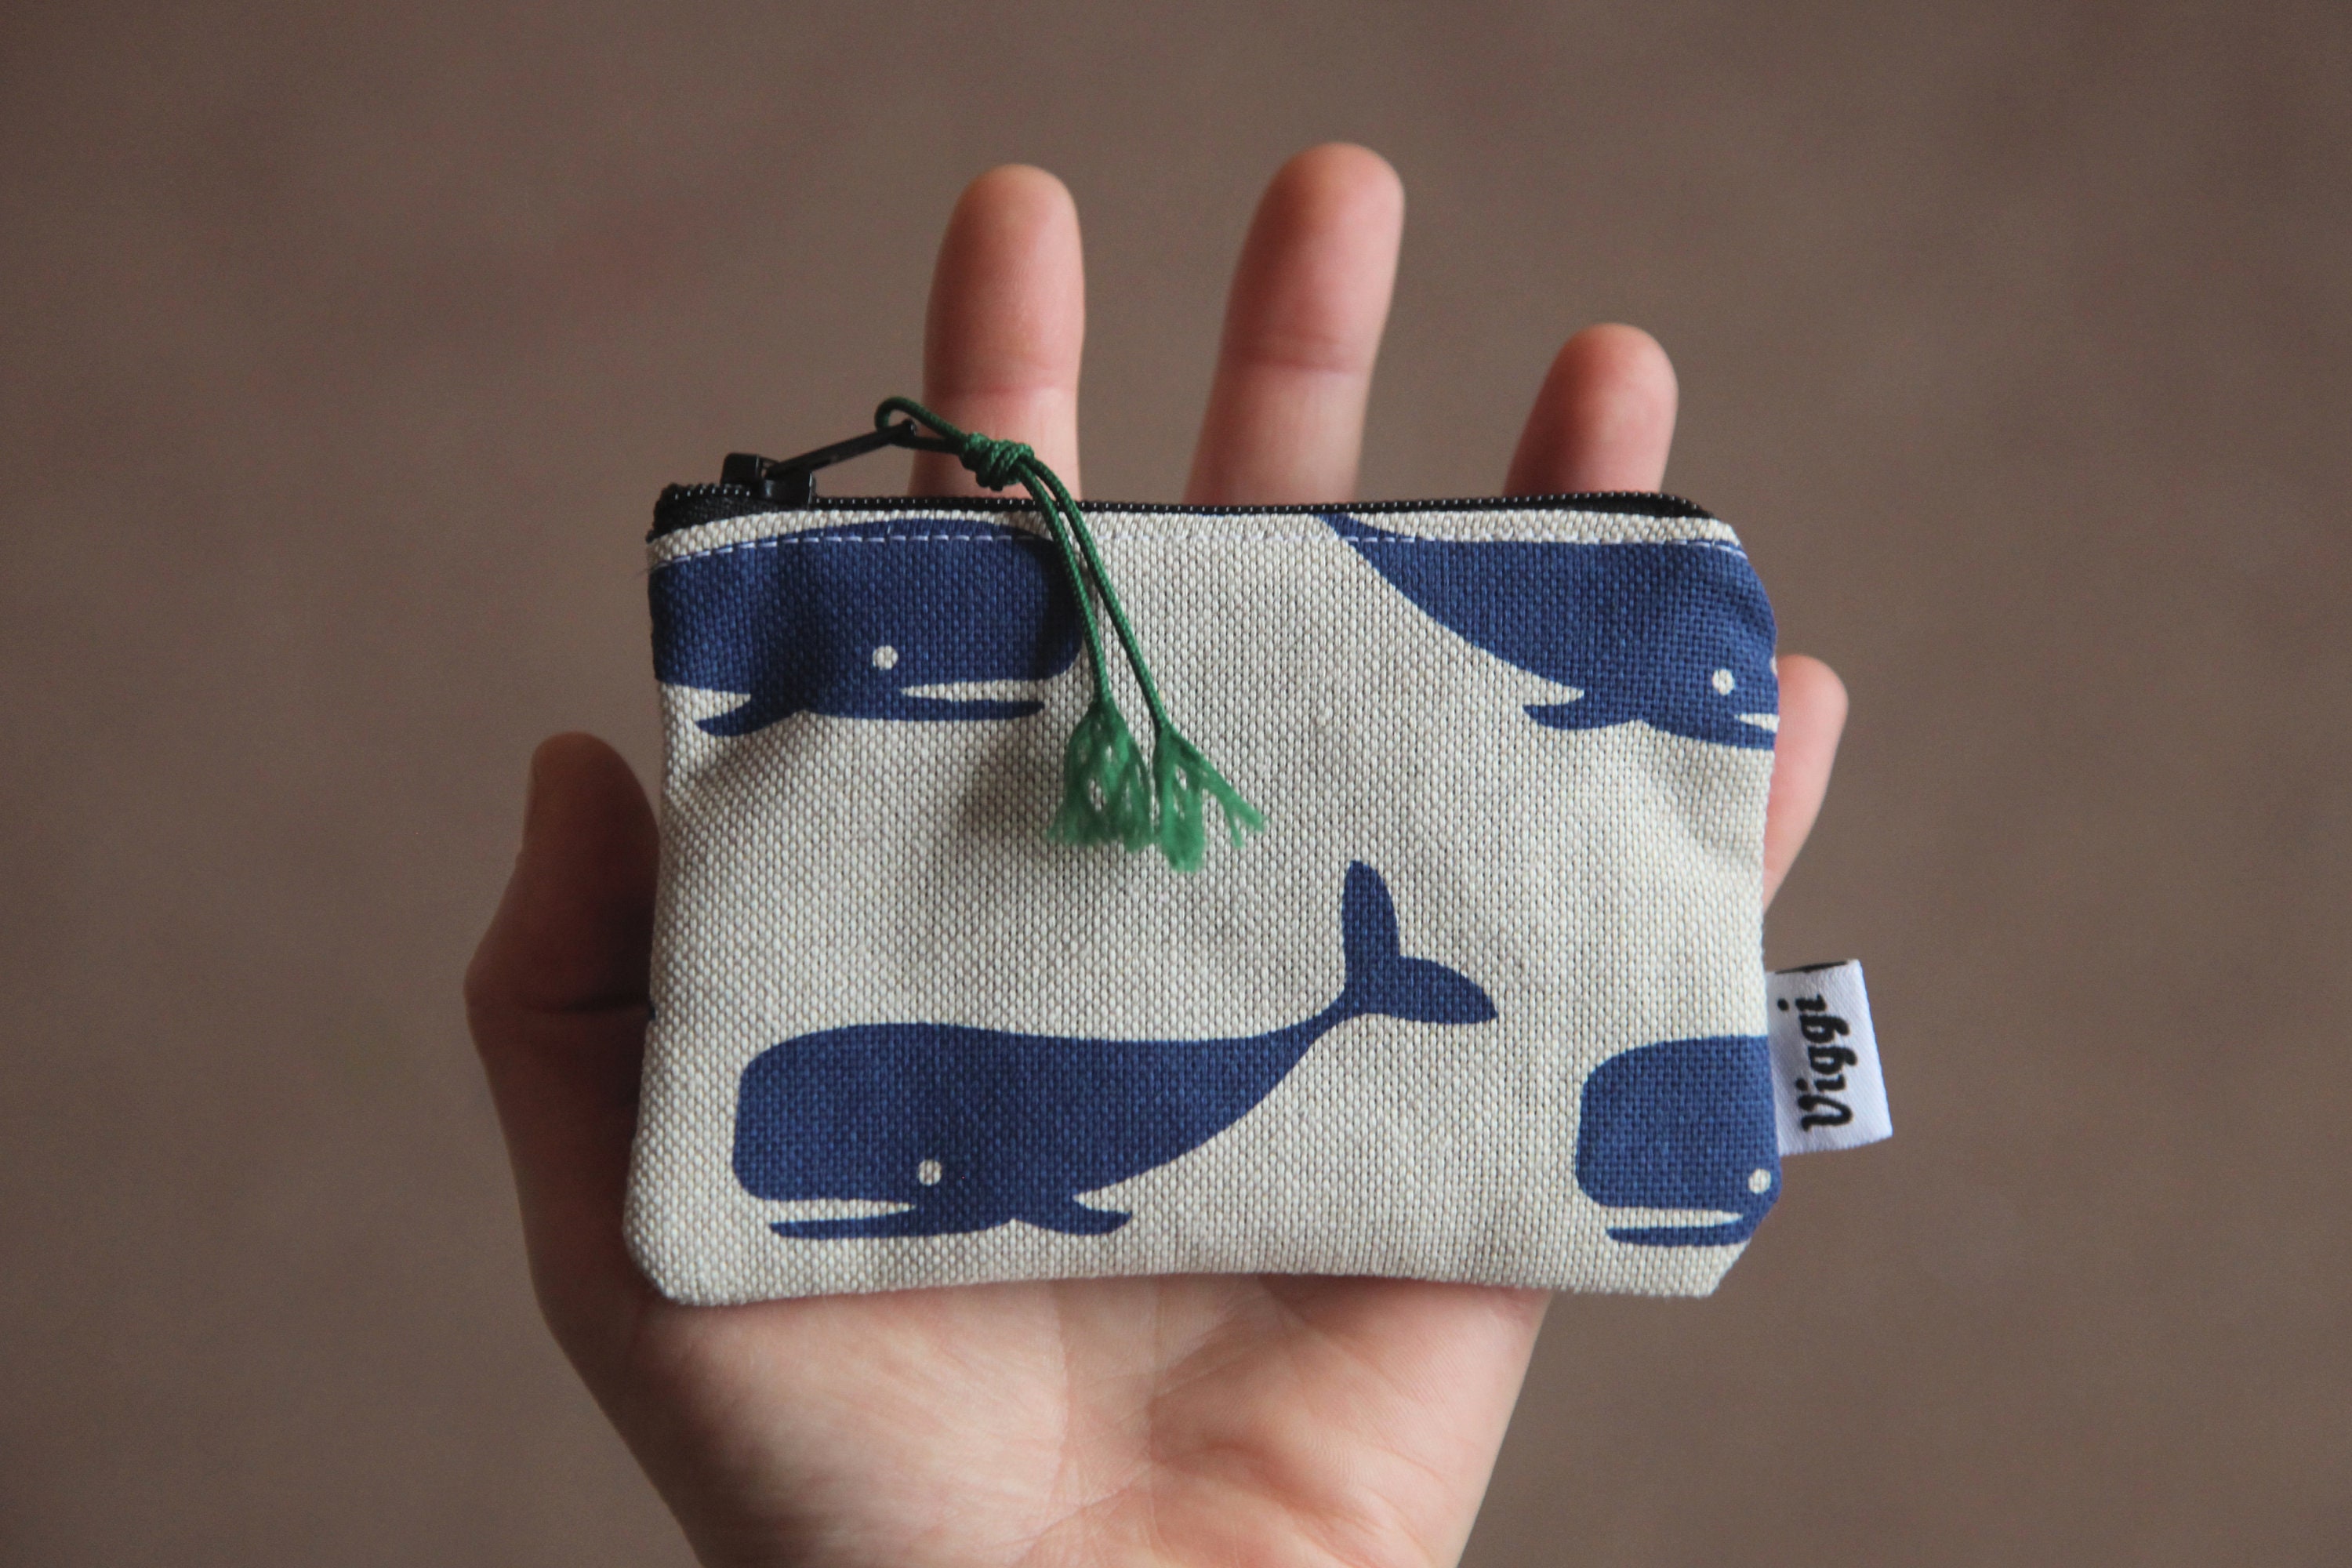 Salmon Journey coin purse | The Whale Museum